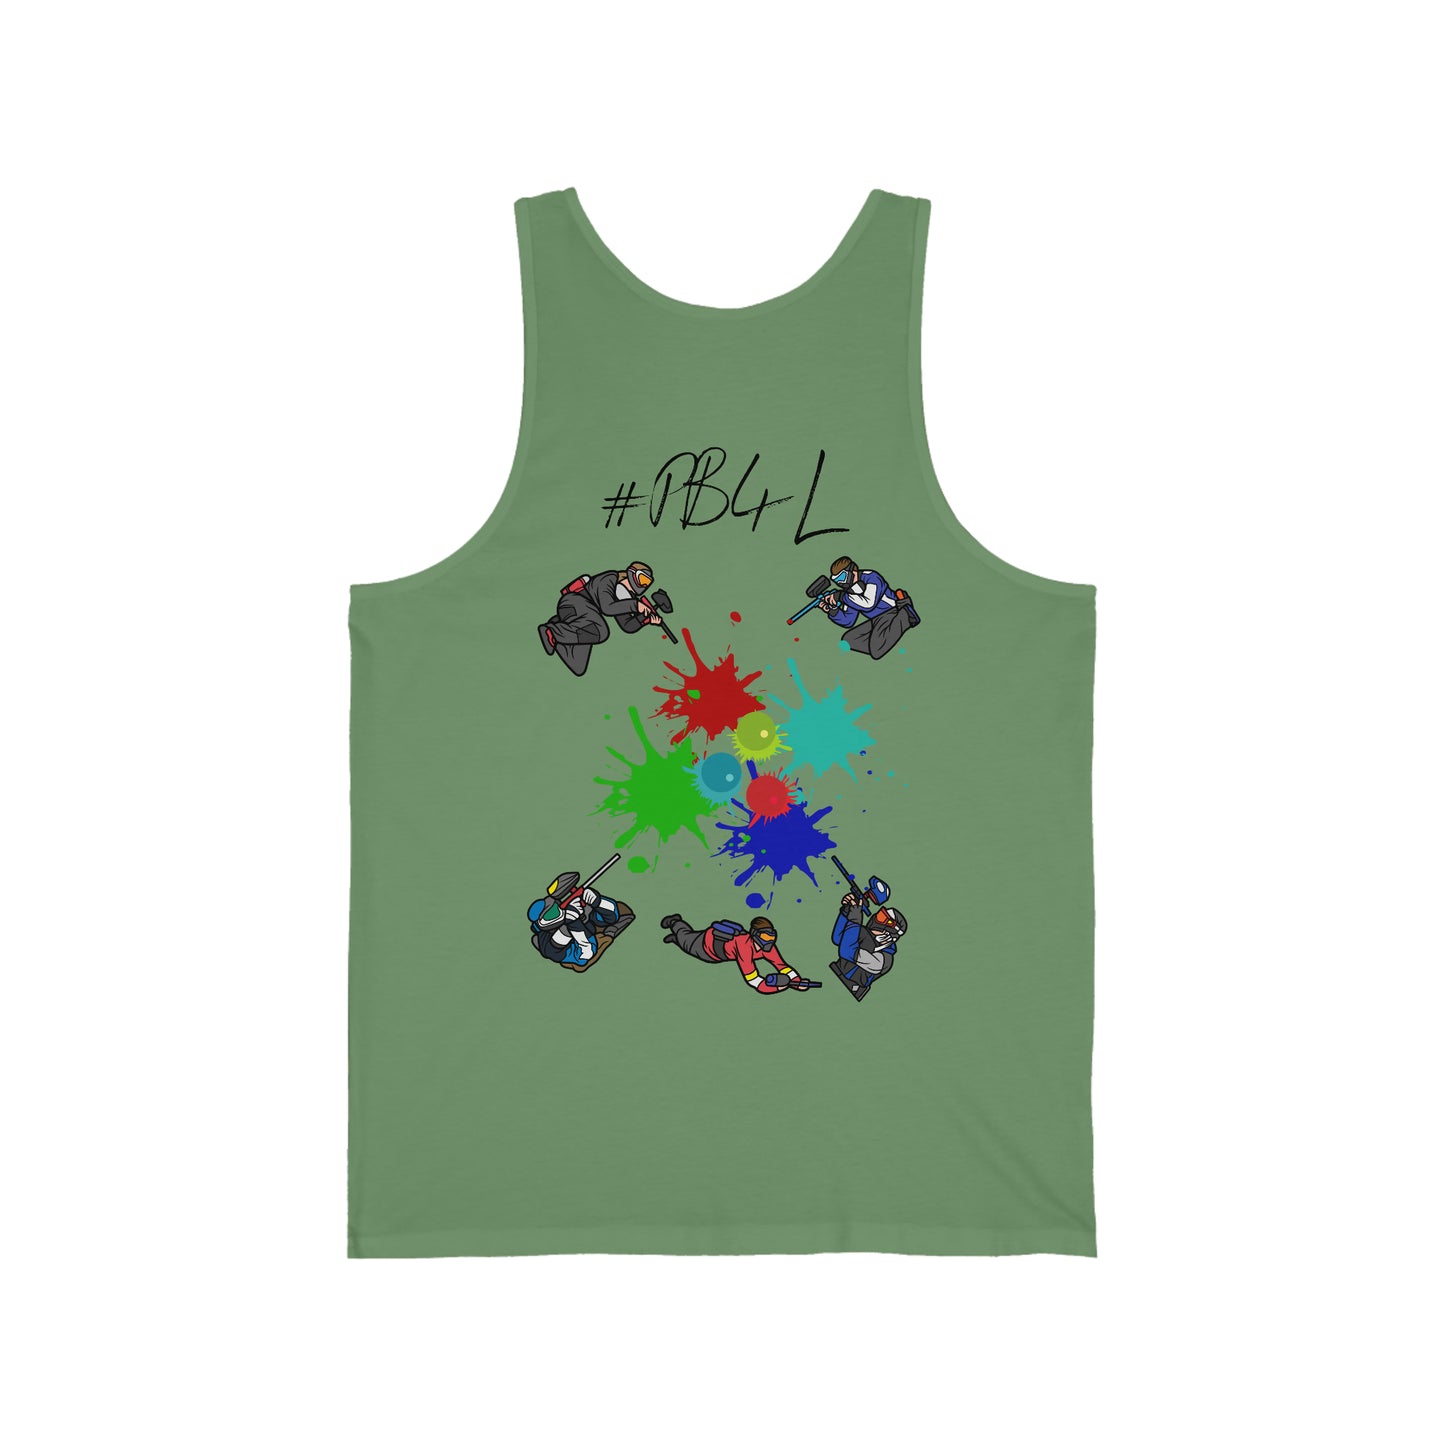 I love it when my wife lets me play paintball Unisex Jersey Tank